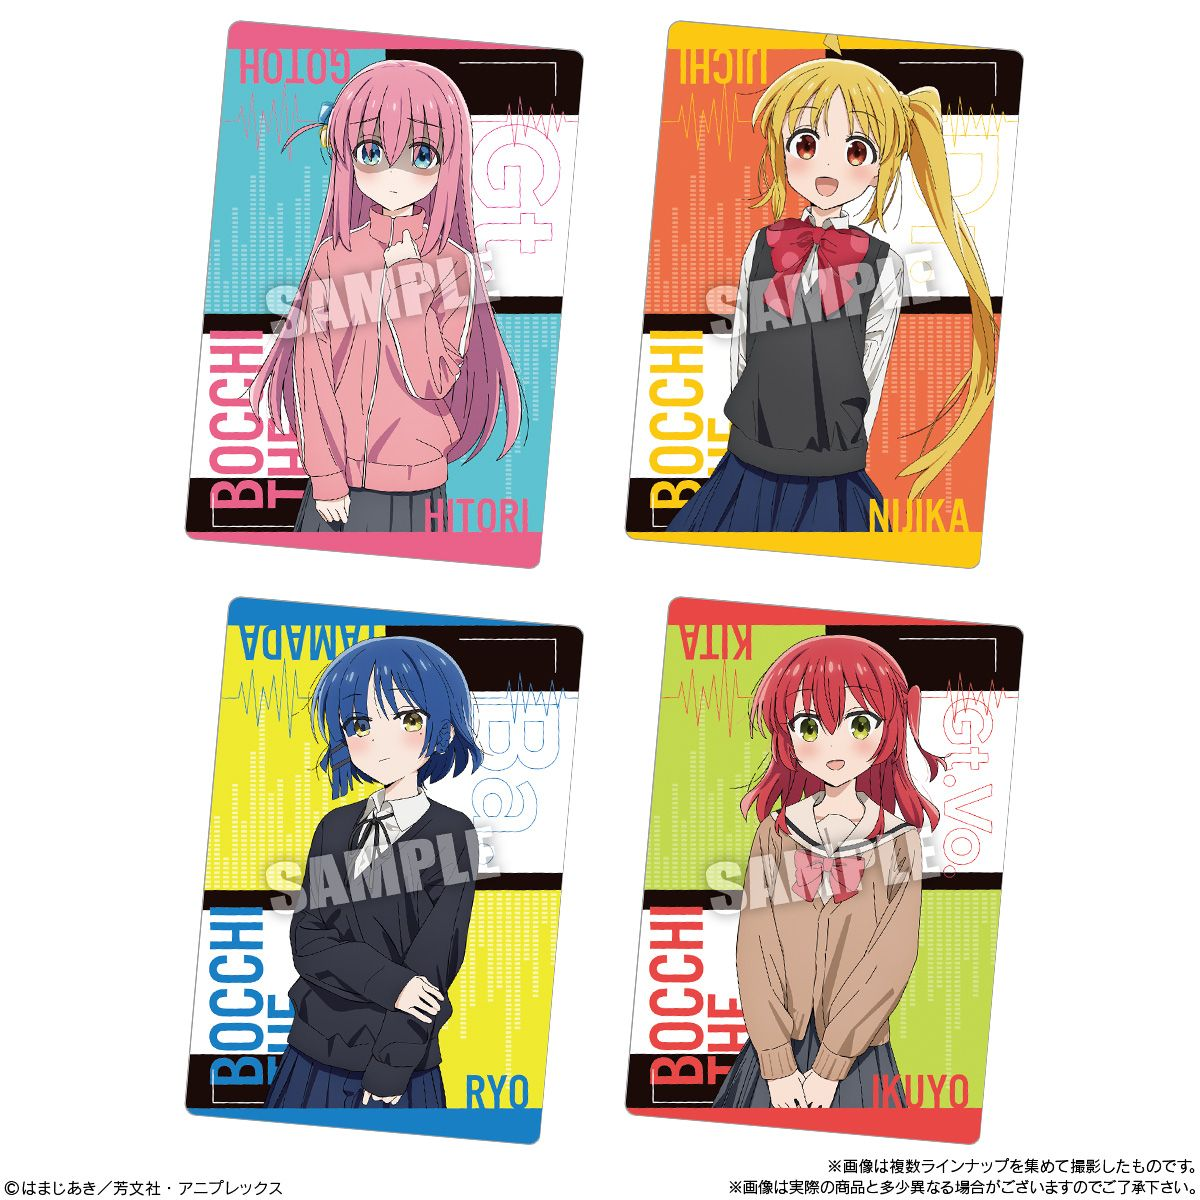 Bocchi The Rock! Metallic Card Collection Wafers-Single Pack (Random)-Bandai-Ace Cards & Collectibles